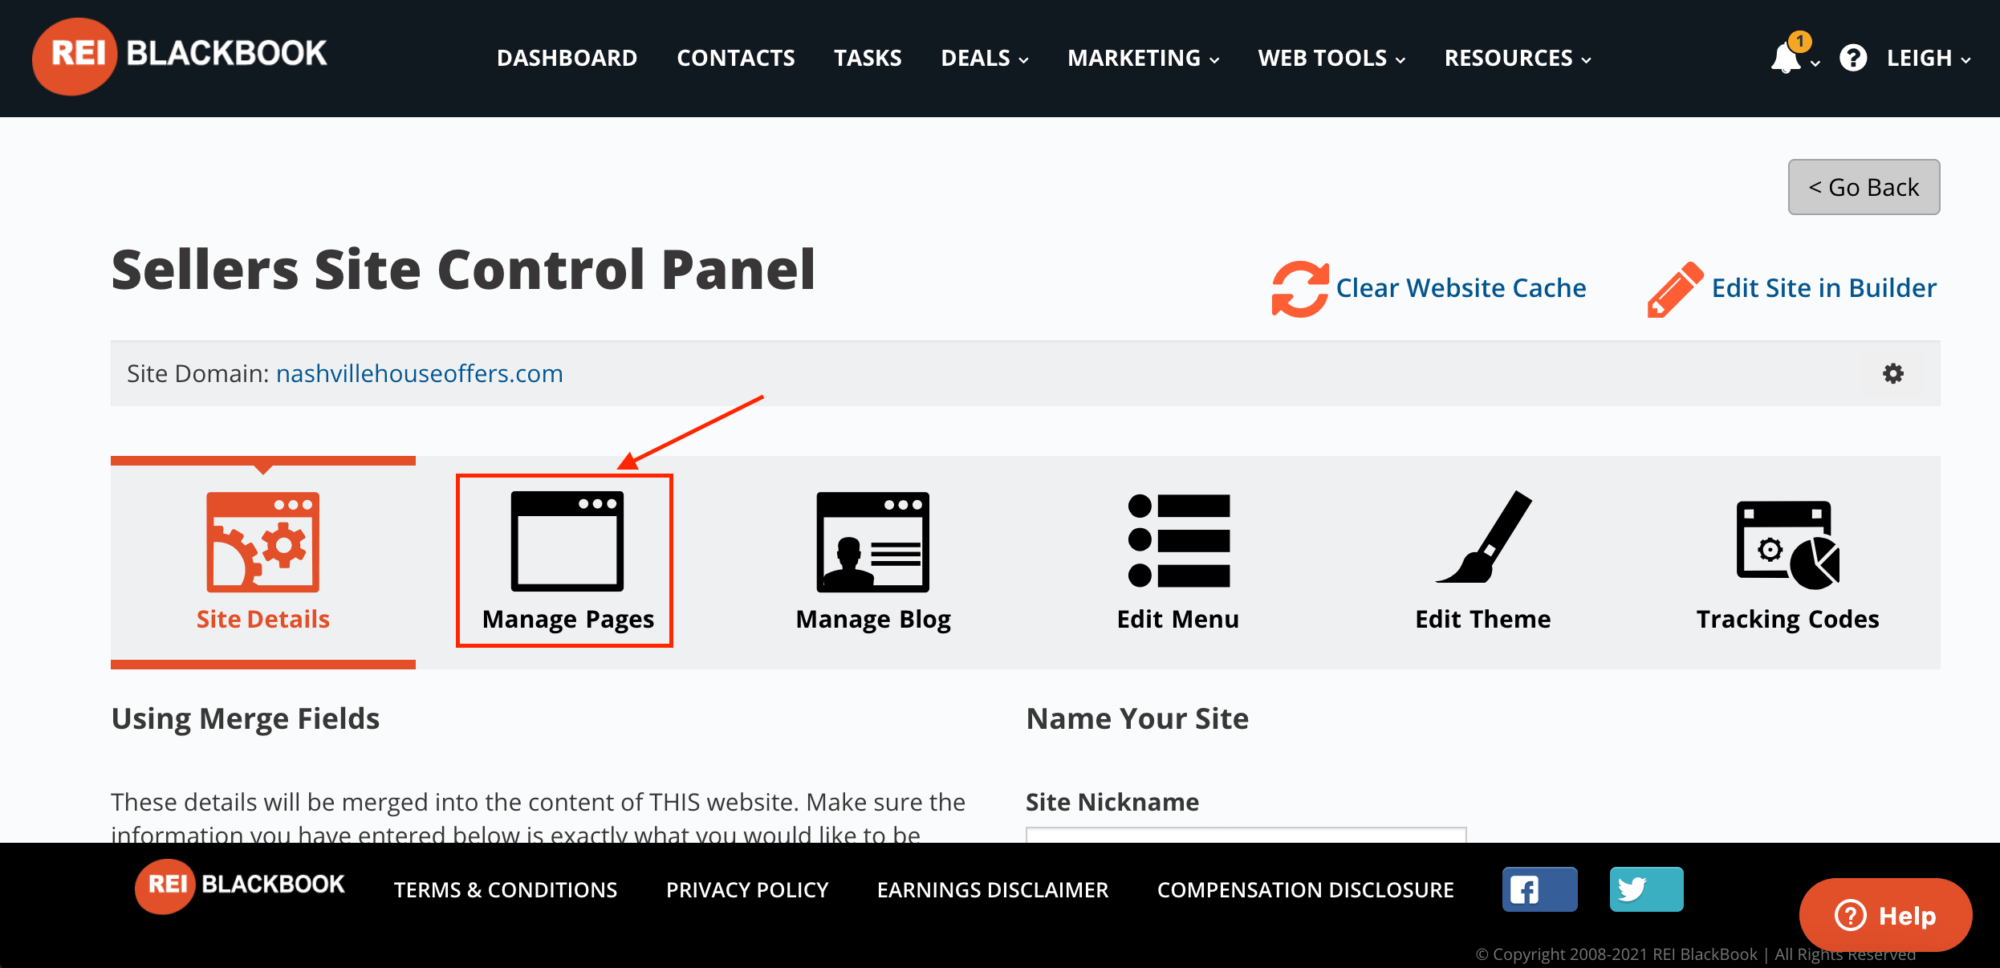 Click "Manage Pages" to create your landing page from the template.